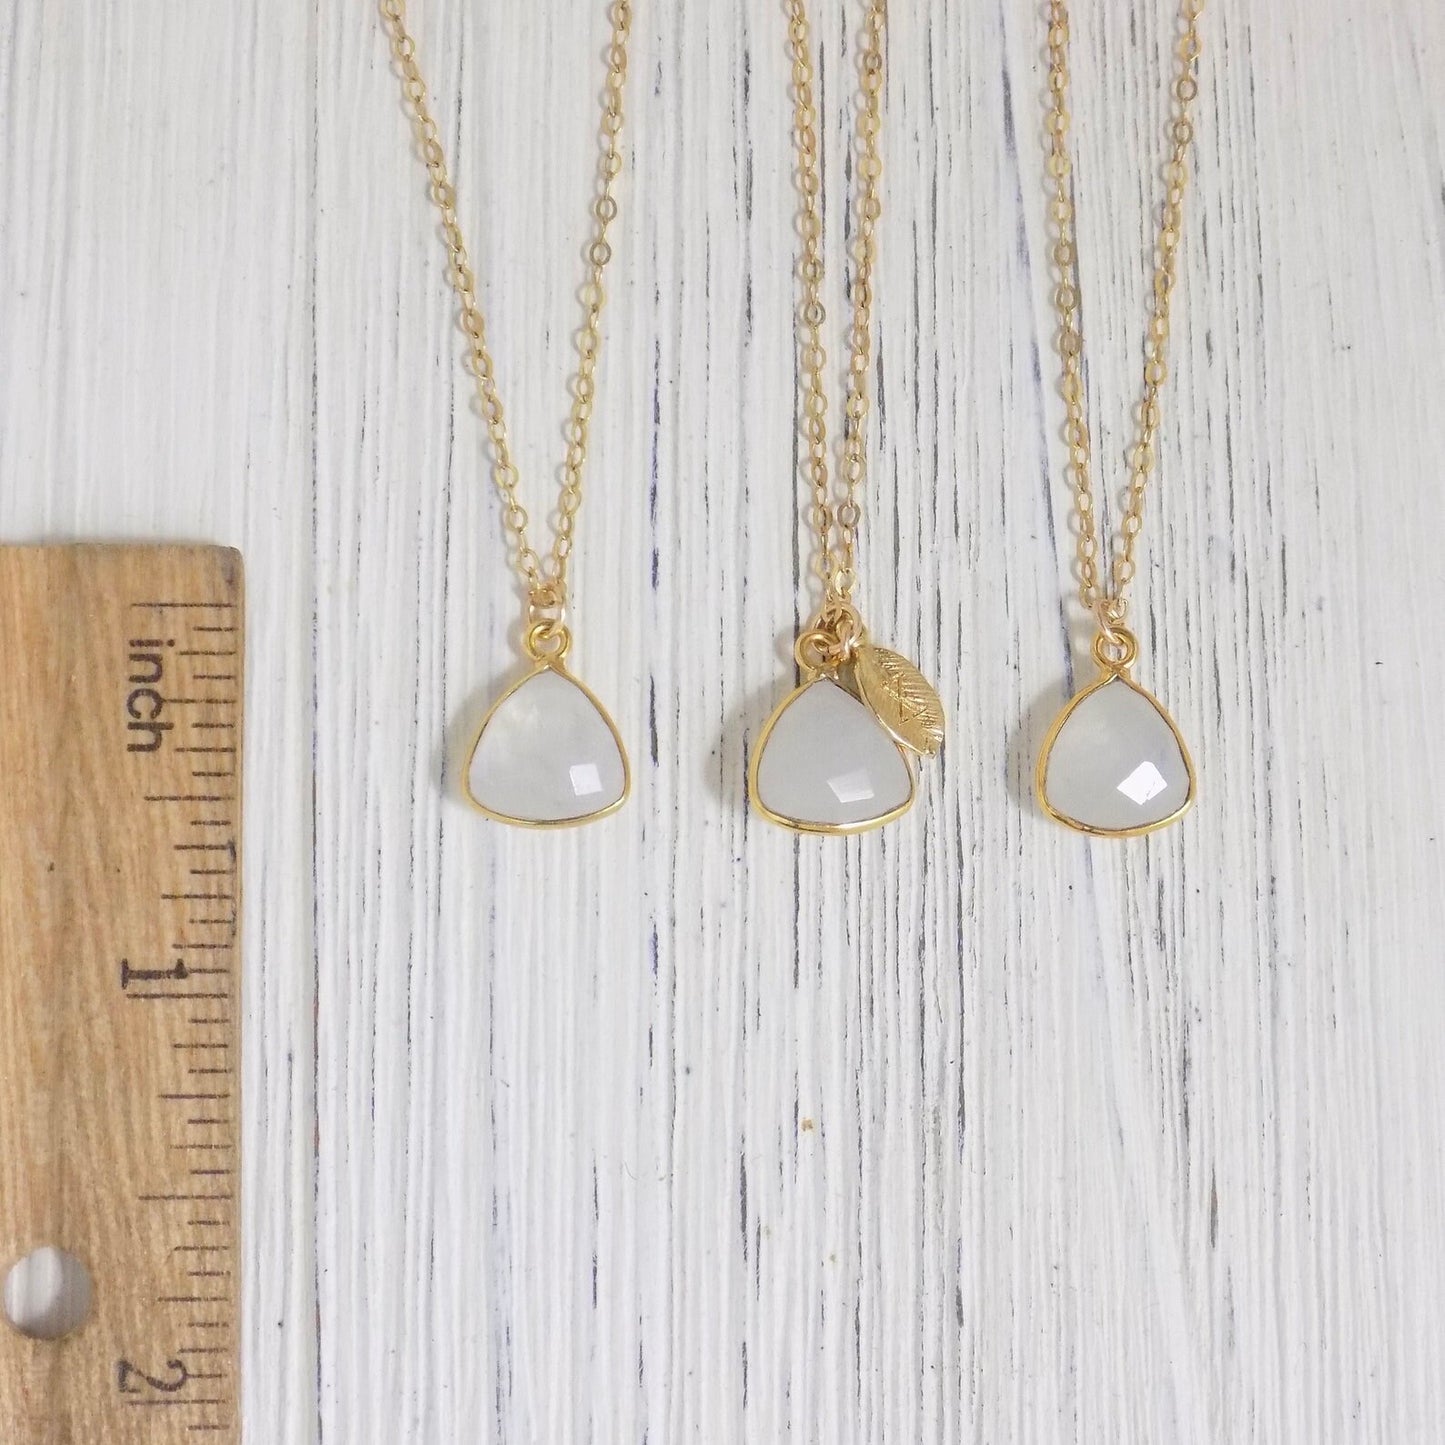 Moonstone Necklace - White Moonstone Necklace Gold